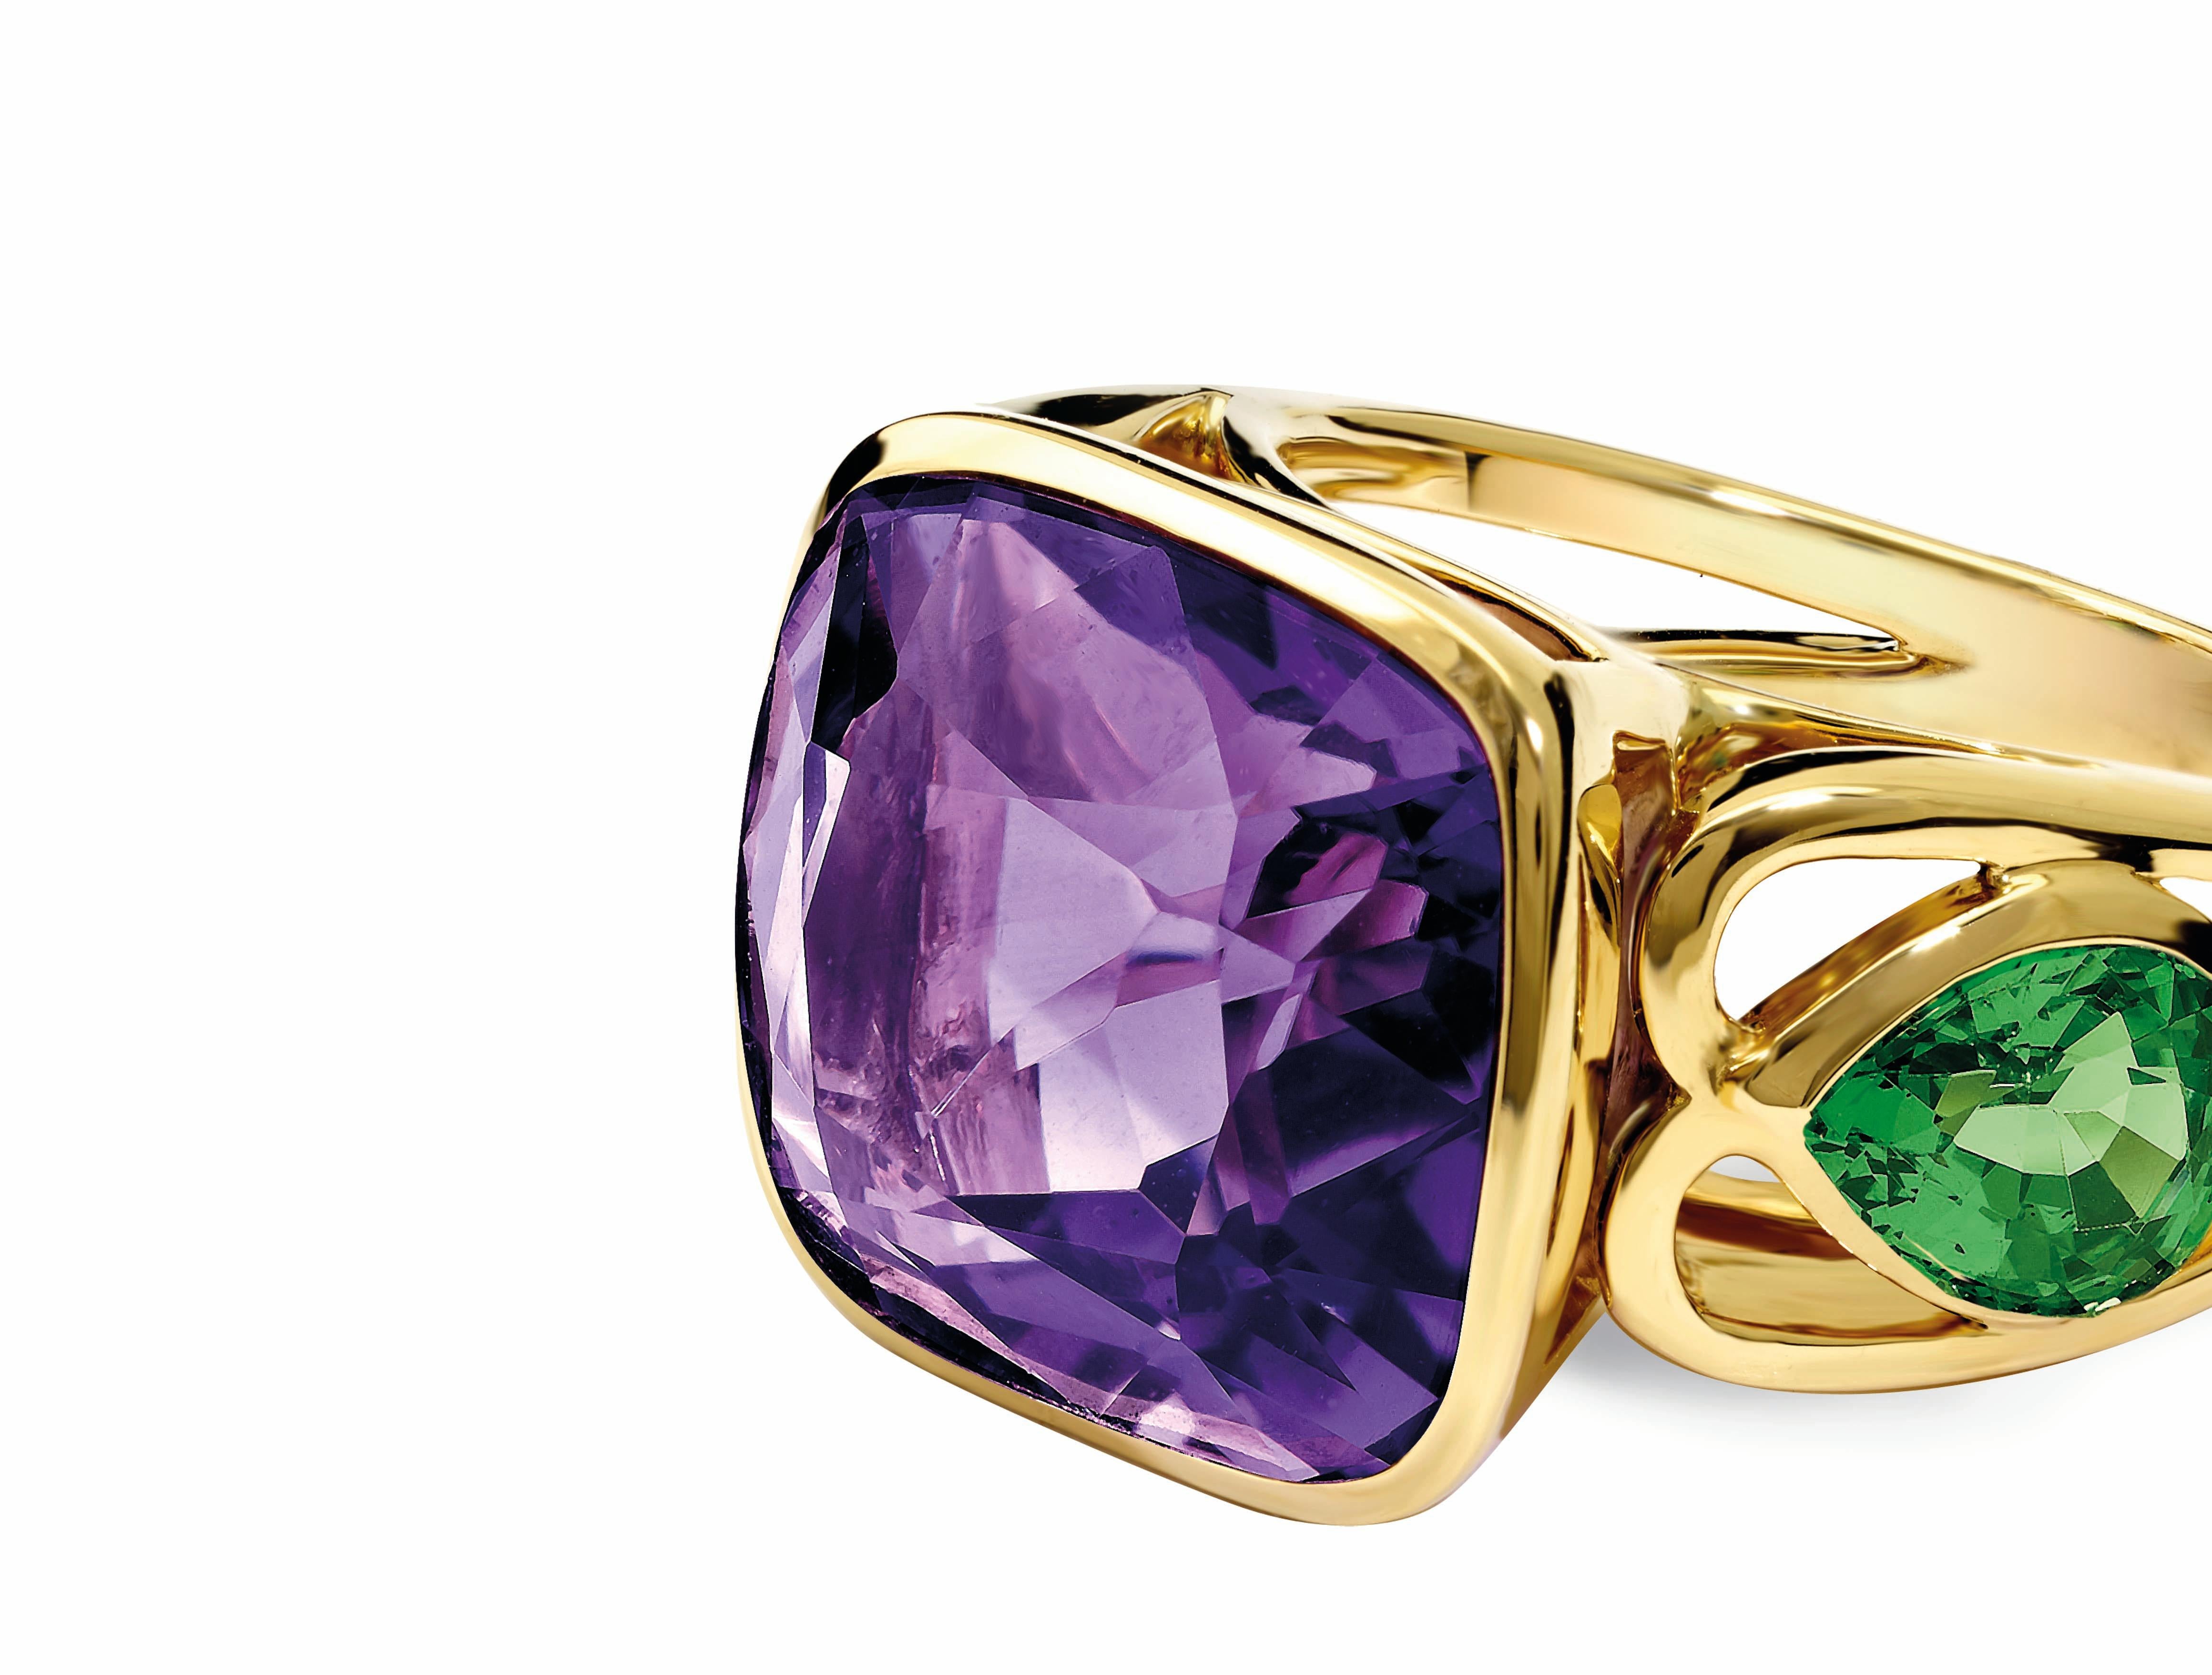 Large Rosario Gagliardi ring in 18 carat yellow gold and set with cushion facetted amethyst  (9.95 carats) from Siazofo mine and with a medium shank with pear shaped rare facetted tsvaorite garnets on shoulders 2.02 carats. Inspired on the railings